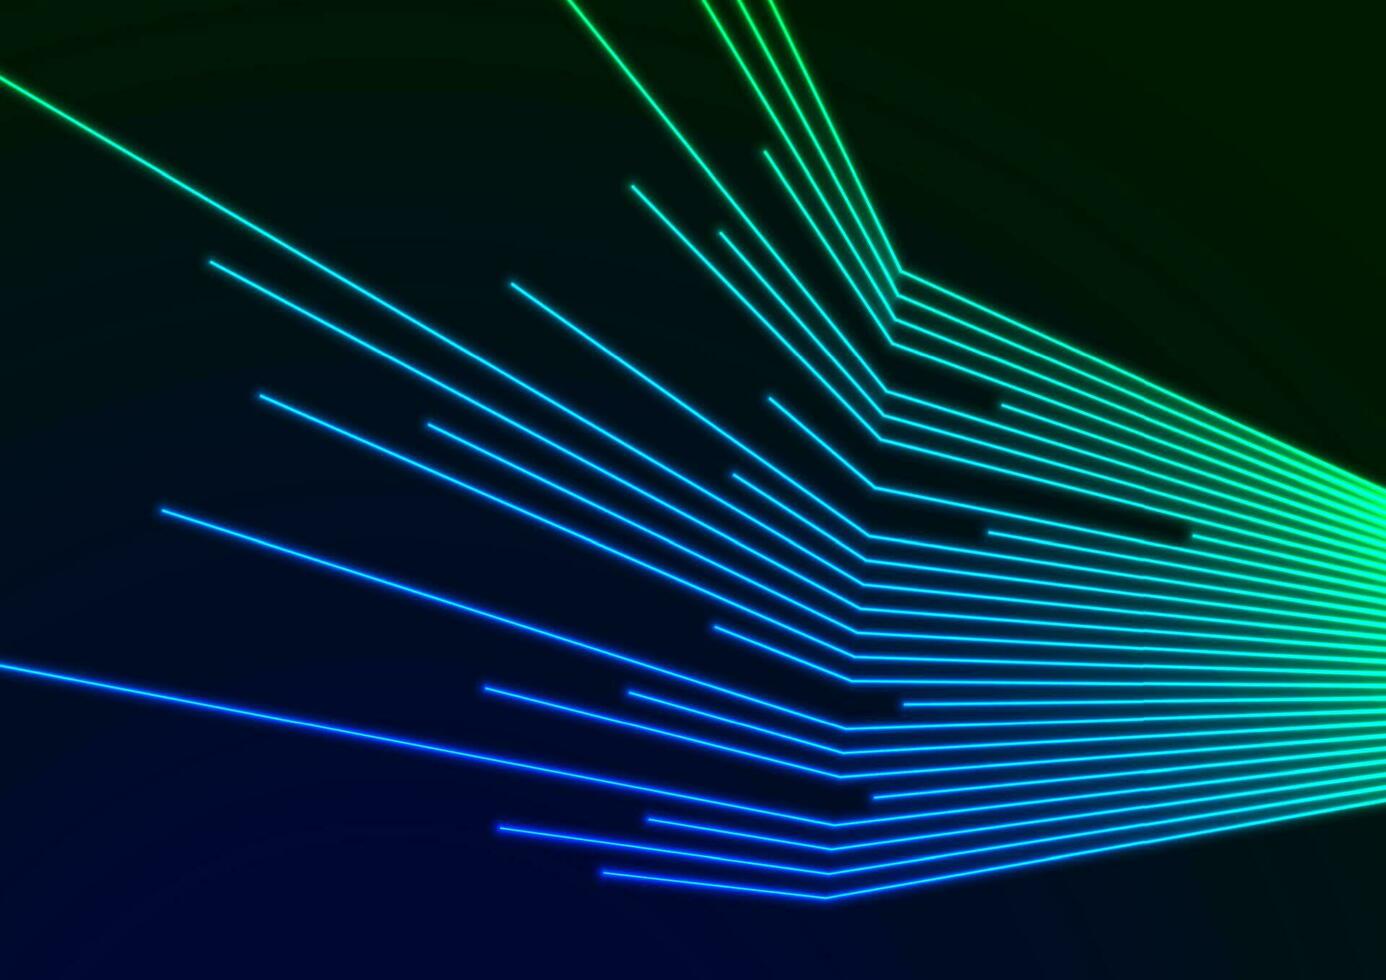 Blue and green neon curved lines tech background vector